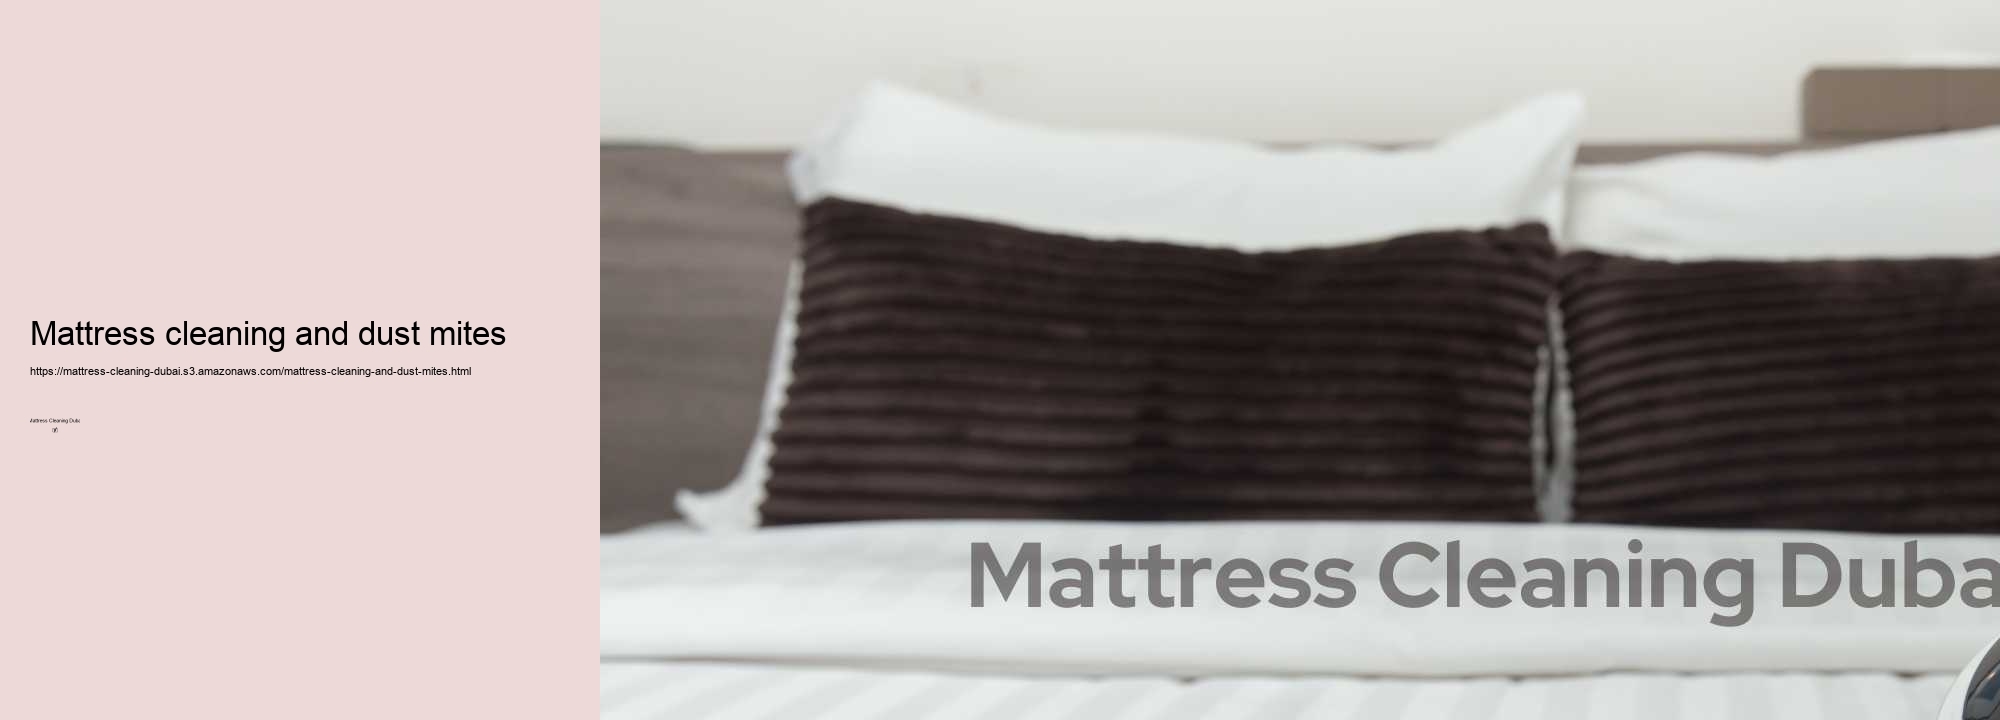 Mattress cleaning and dust mites